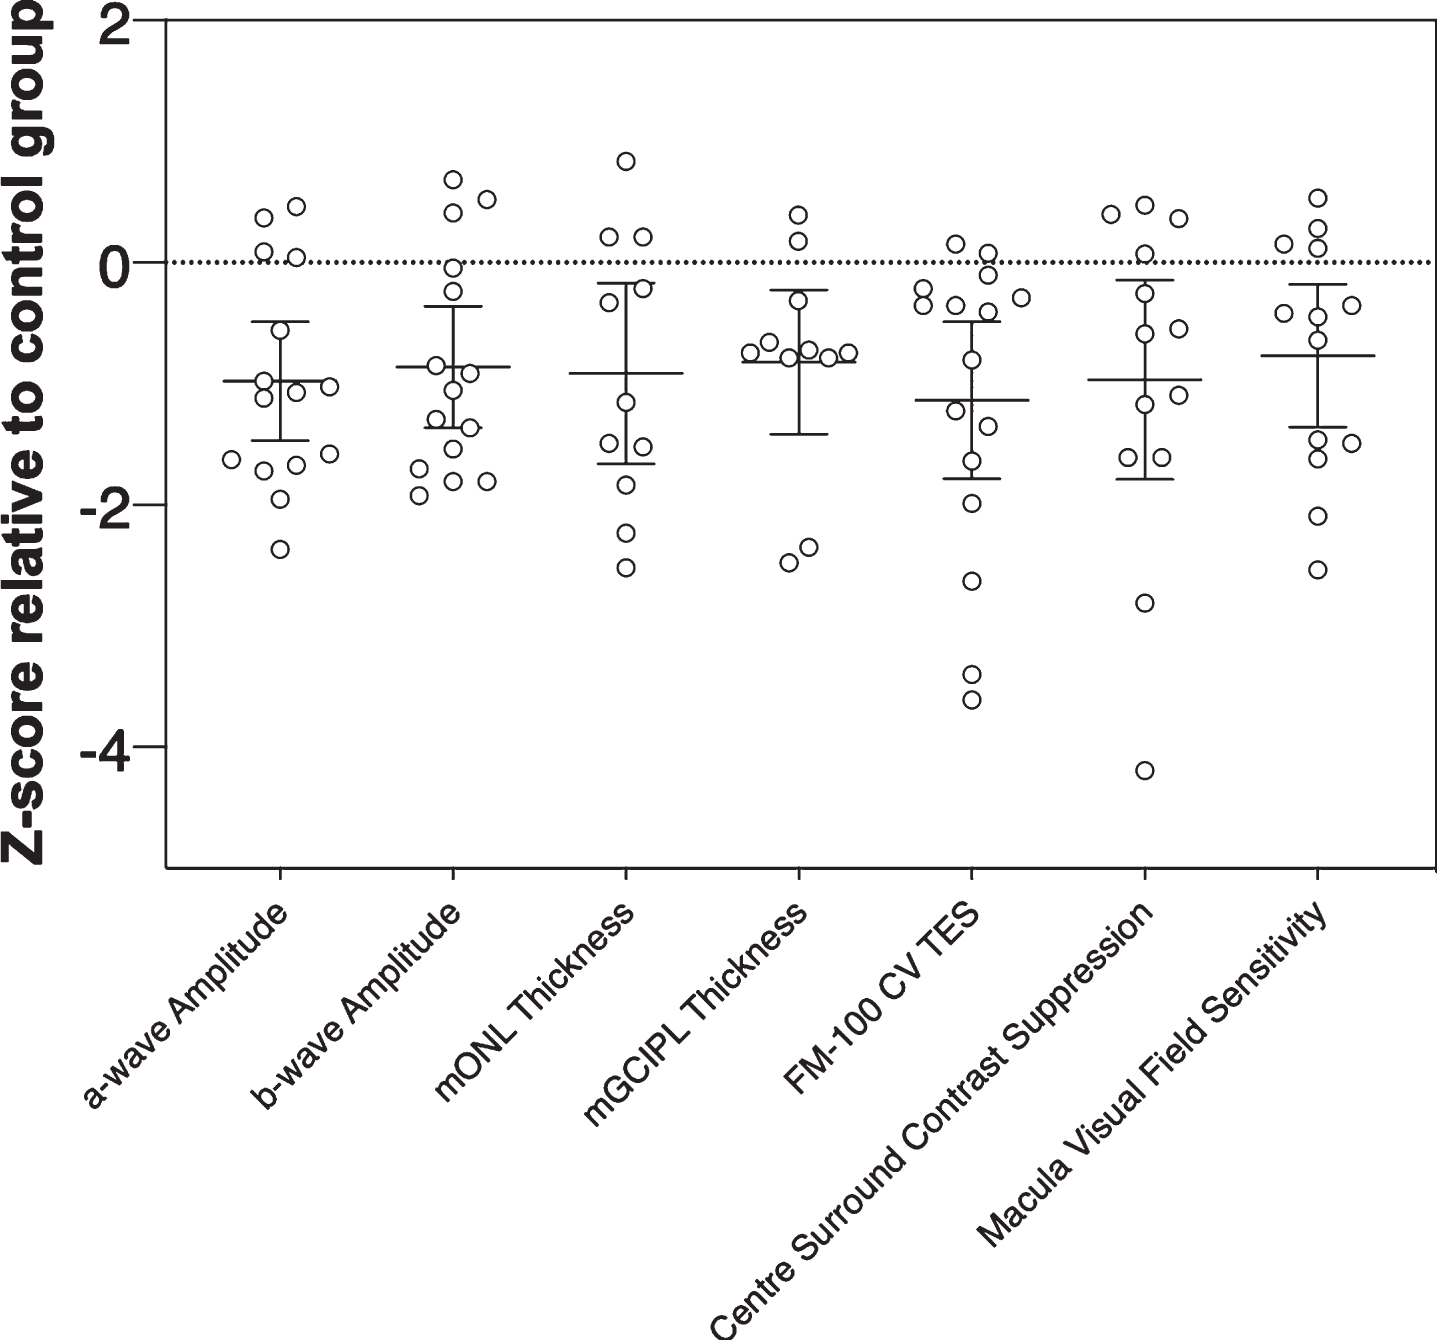 Magnitude of inter-group effects across different key parameters in Parkinson’s disease participants. Z-scores were calculated relative to the control group using pooled standard deviation across both groups. Negative z-scores indicate Parkinson’s disease participants had smaller ERG amplitudes (a-wave, b-wave), thinner retinal layer thickness (mONL, mGCIPL), poorer color vision (CV, FM-100 test error score, TES), weaker center surround perceptual contrast suppression and reduced macular visual field sensitivity relative to the control group mean. Error bars are the 95% confidence limits of the mean.